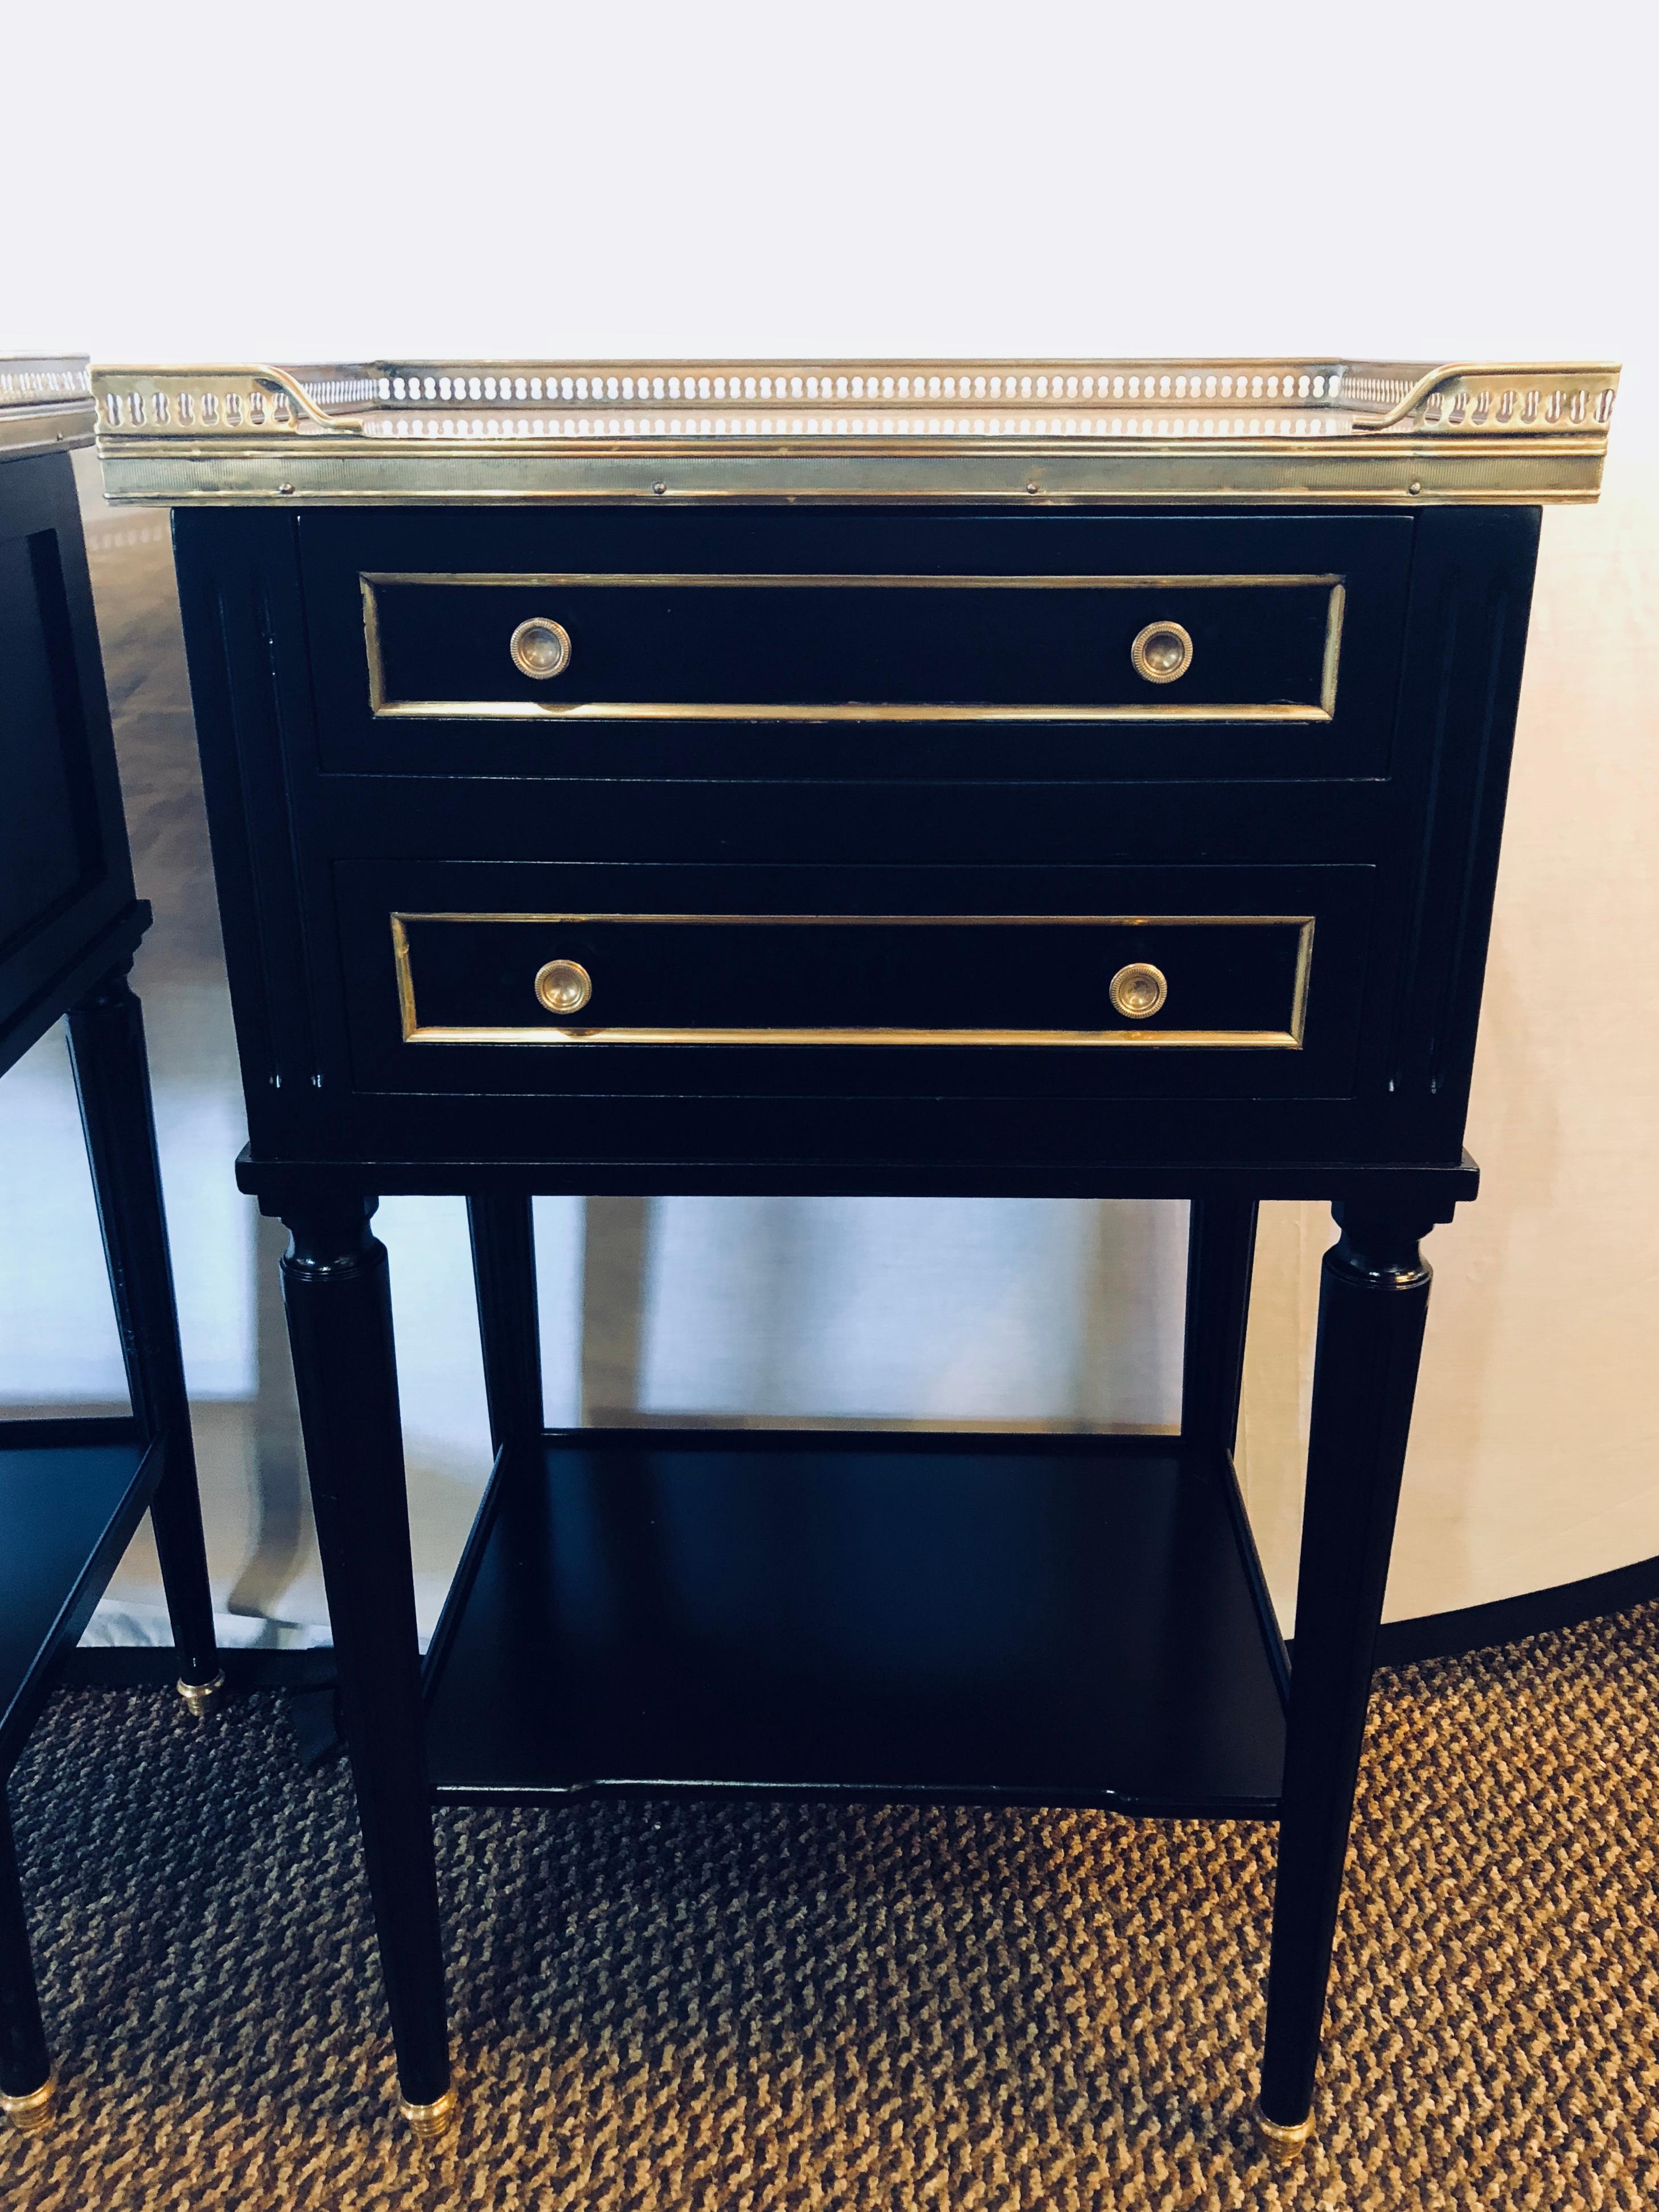 Pair of galleried marble-top ebony end tables nightstands in the manner of Jansen. Hollywood Regency at its finest are these marble tops set in a bronze galleried frame supported by a Louis XVI style case of two drawers over a single shelf. The pair